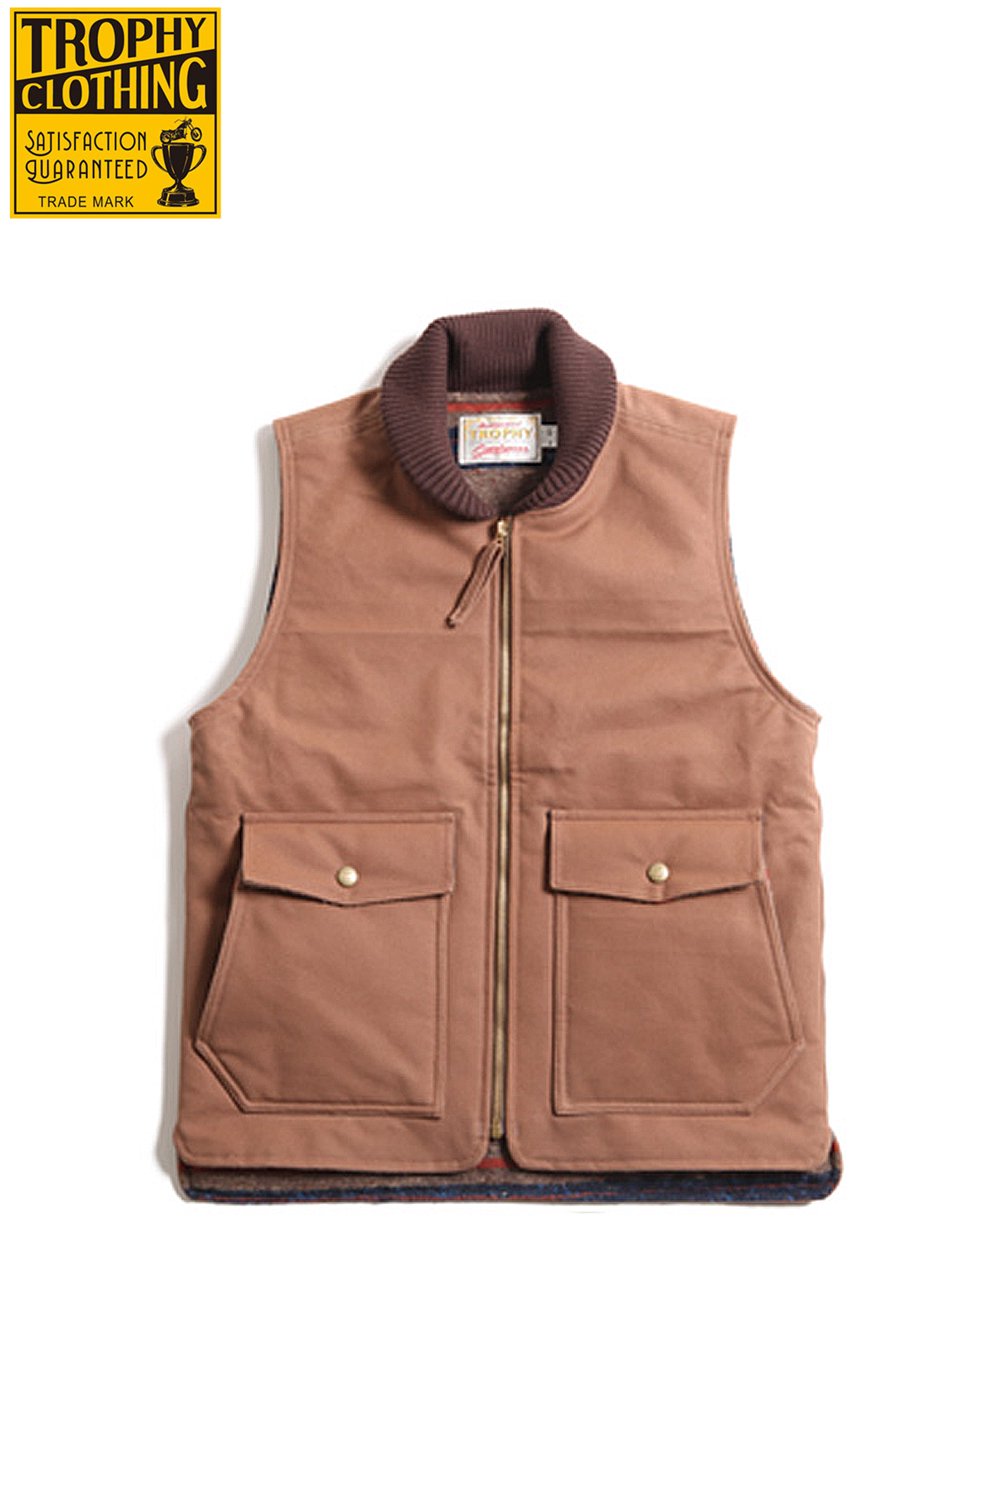 TROPHY CLOTHING(トロフィークロージング) ストームベスト OILED DUCK STORM VEST TR18AW-303  通販正規取扱|ハーレムストア